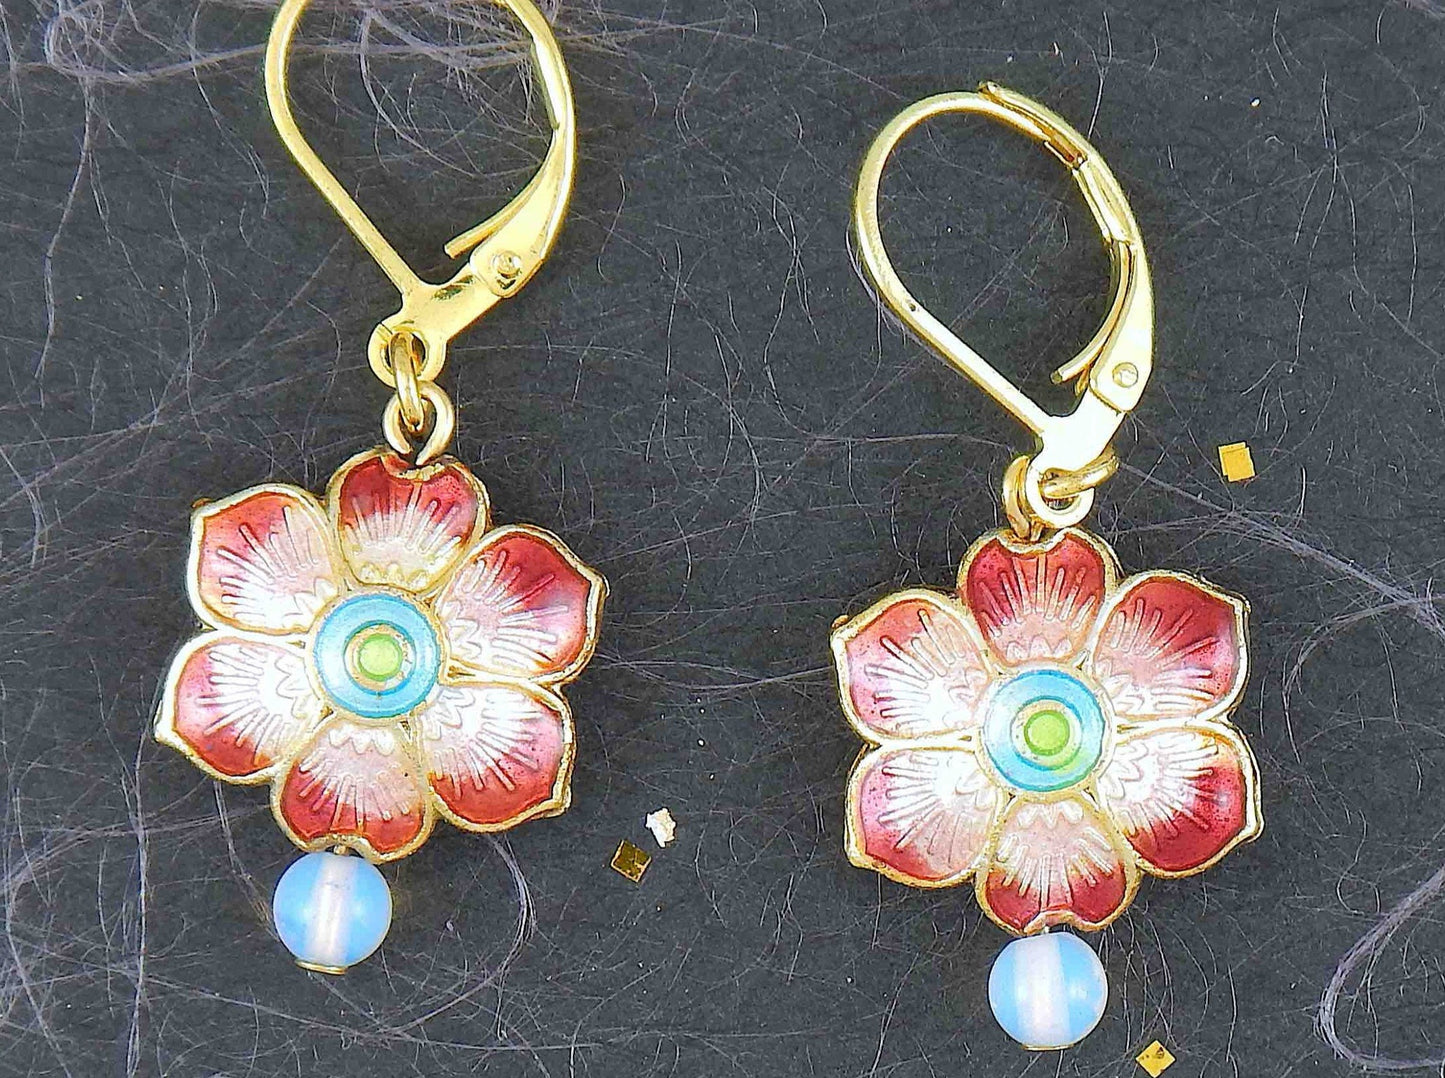 Short earrings with small enamelled flowers offered in 6 colours, synthetic moonstone (opalite), gold-toned stainless steel lever back hooks